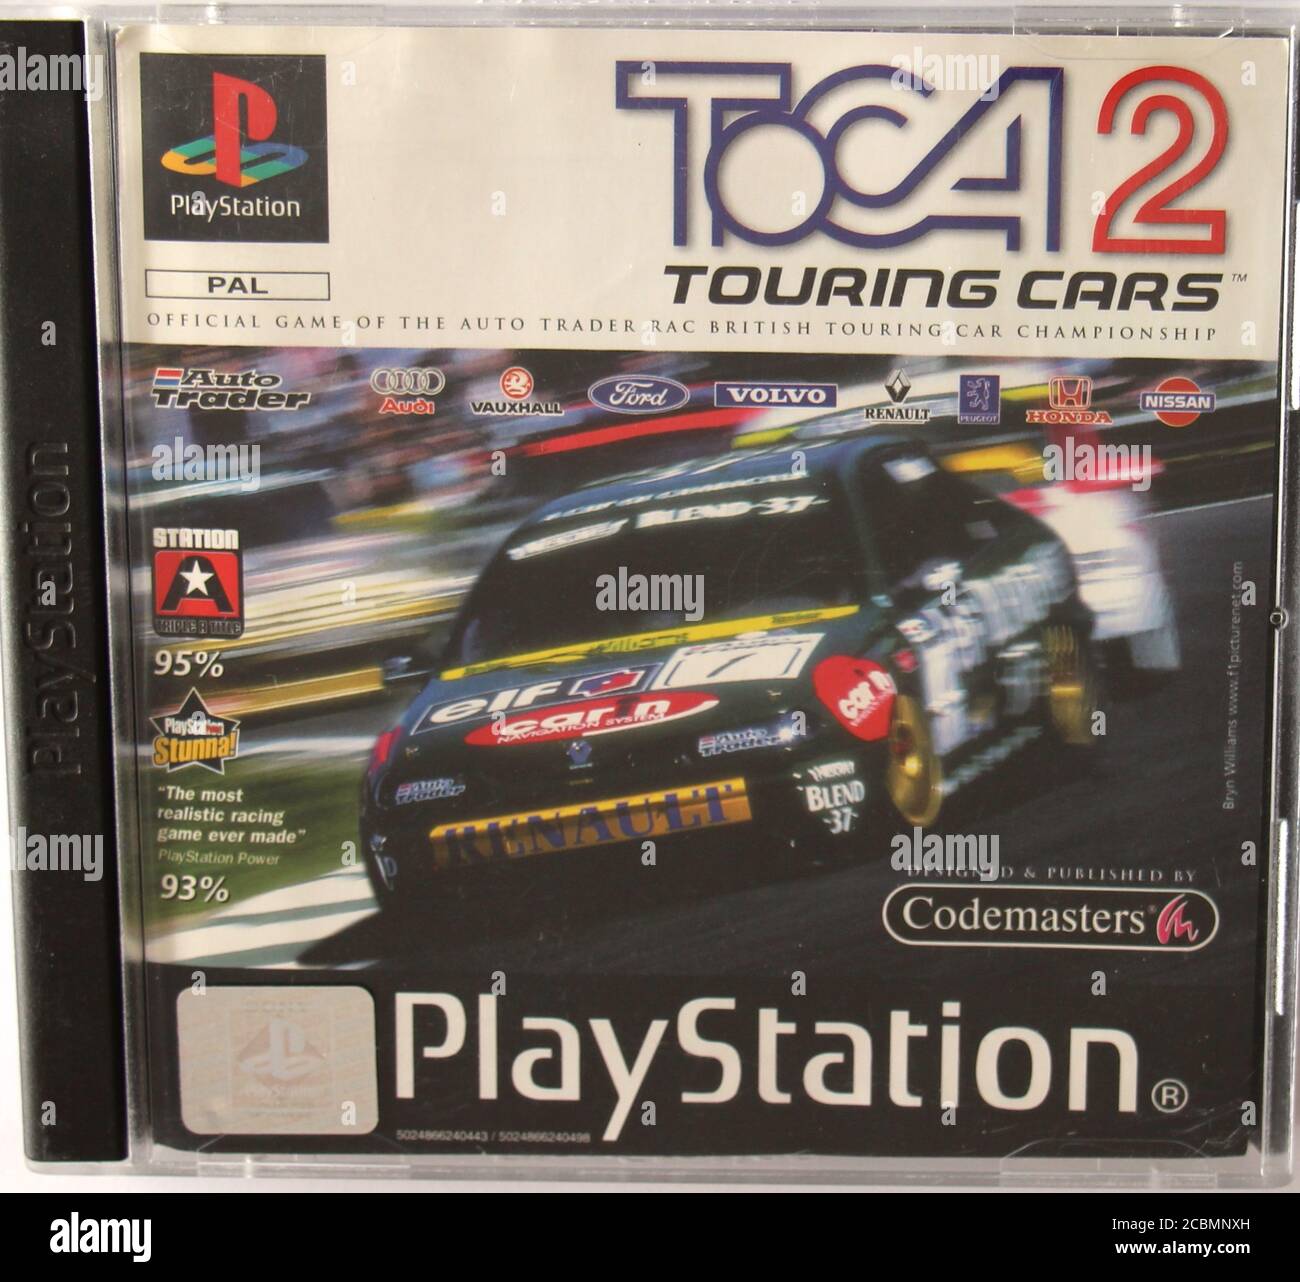 Photo of an Original Playstation 1 CD box and cover for TOCA 2 touring cars racing game Stock Photo